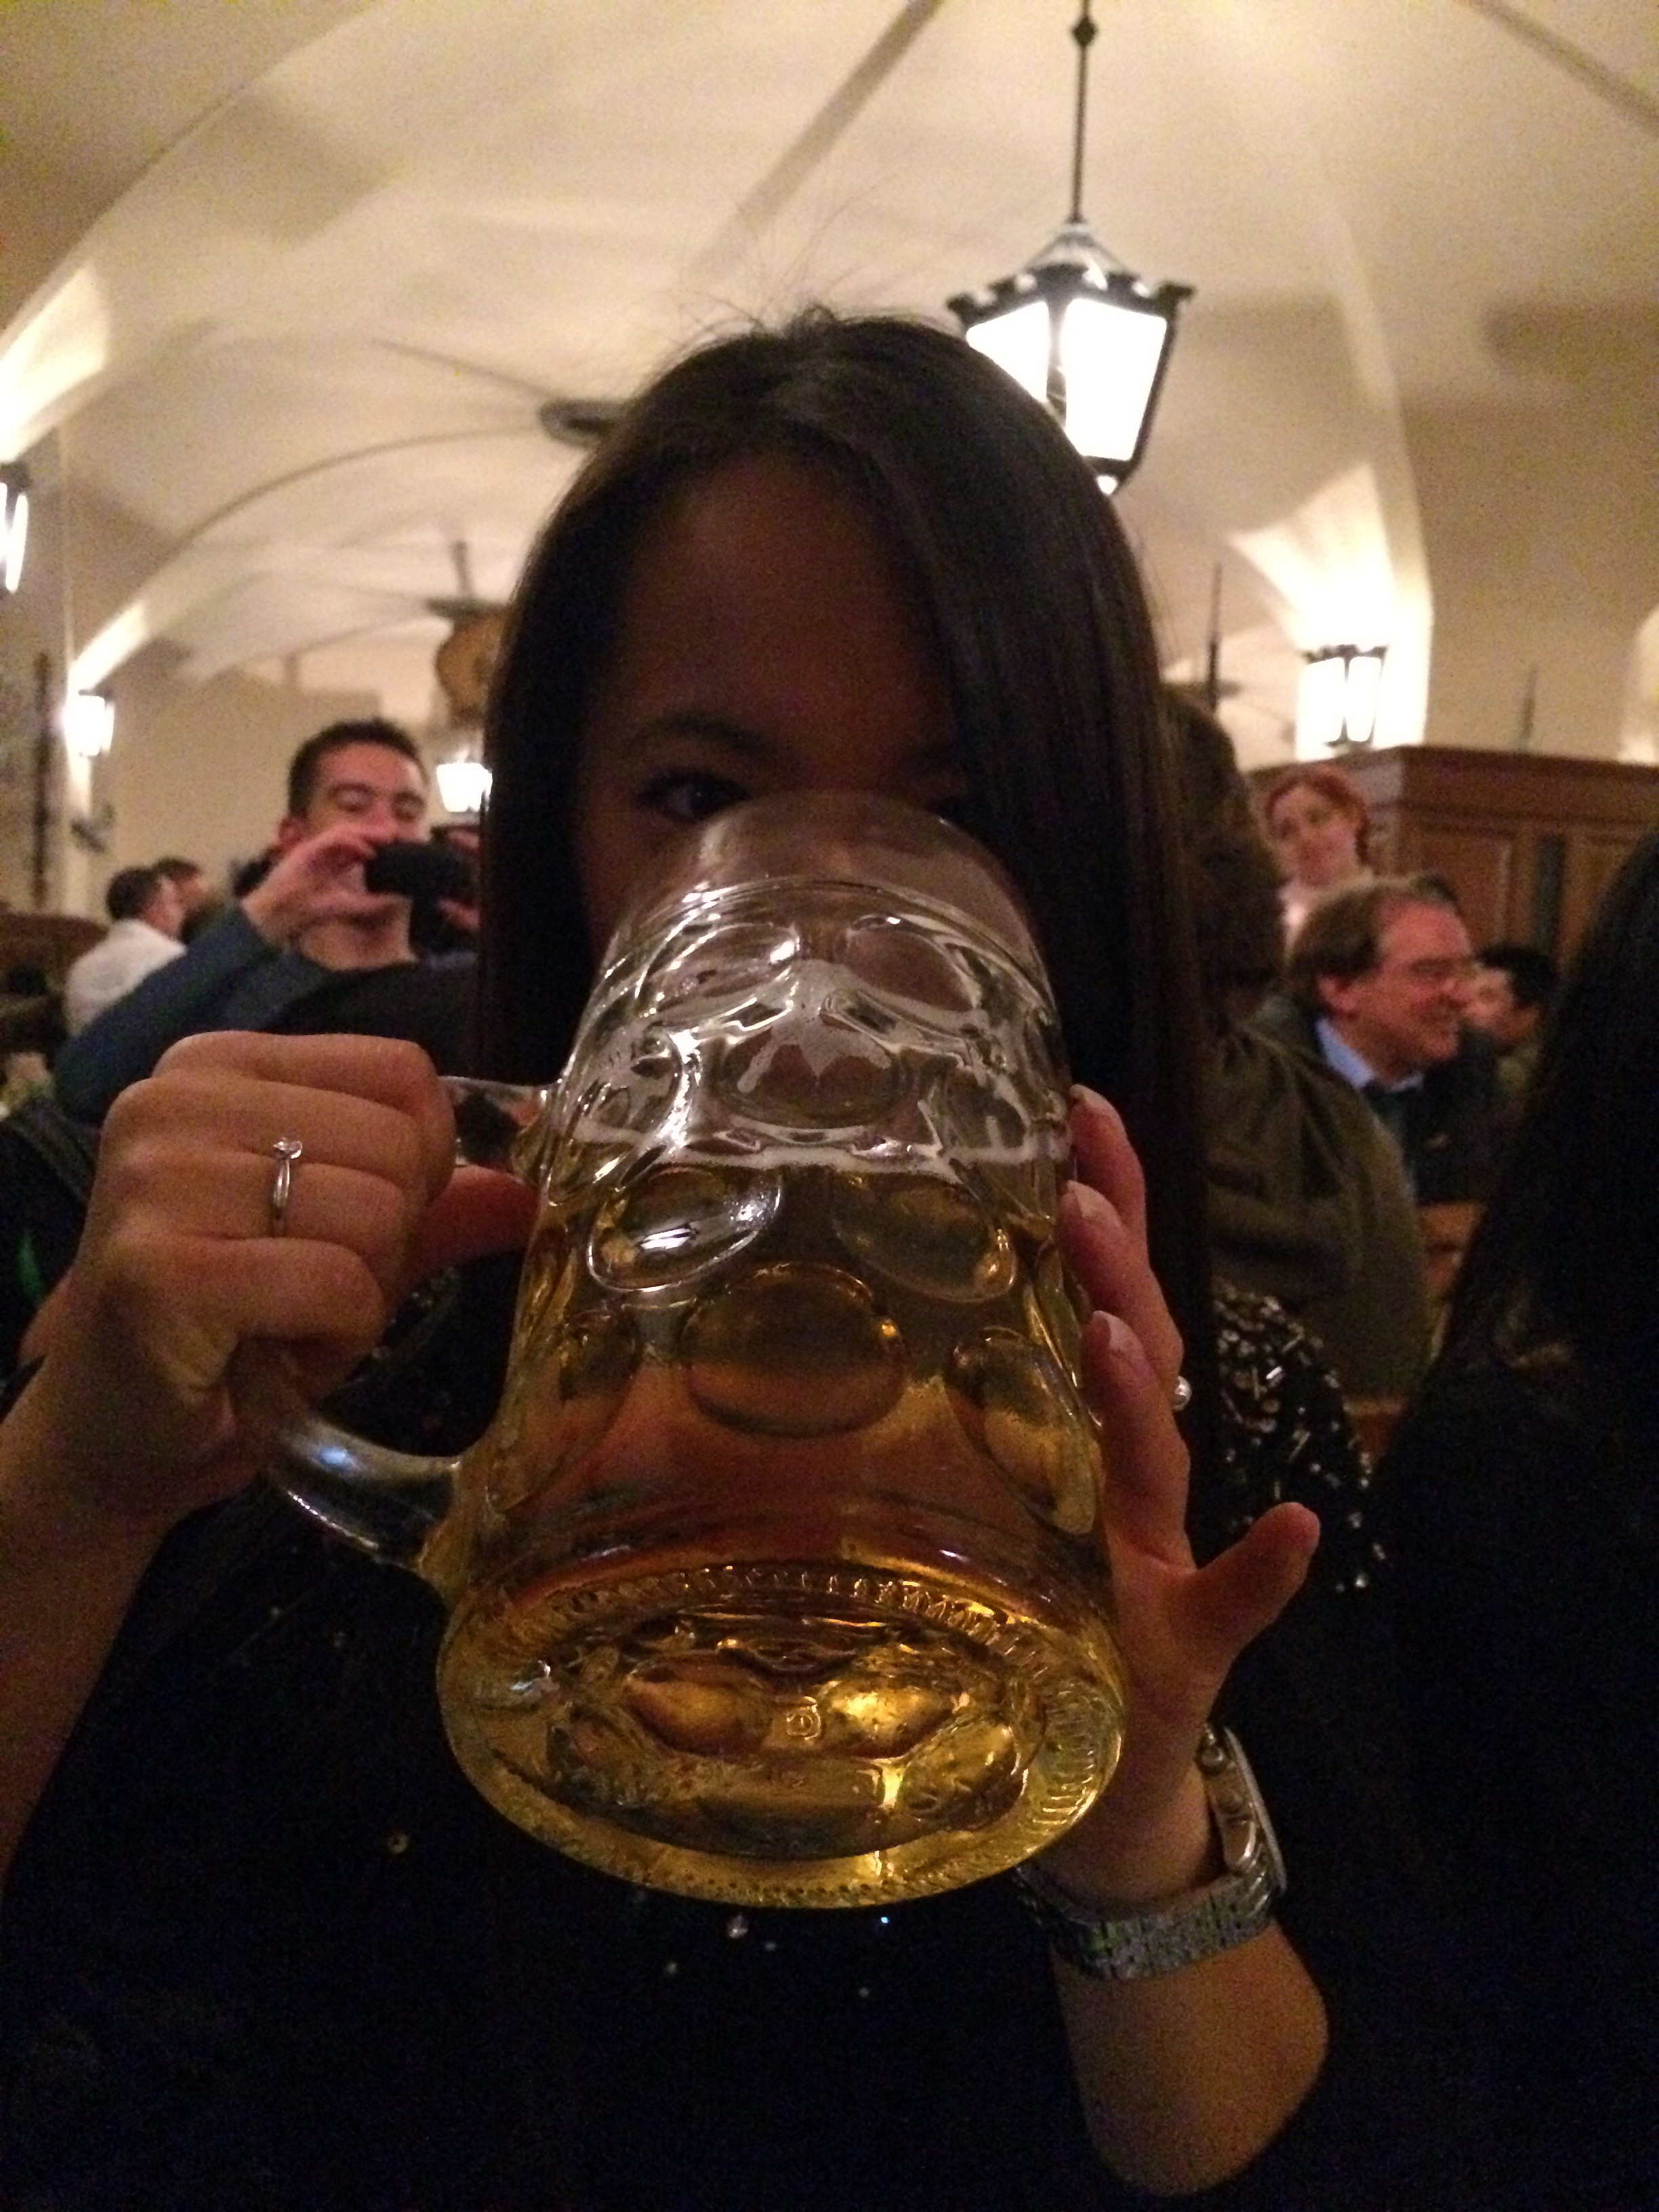 With my Stein in the Hofbräuhaus